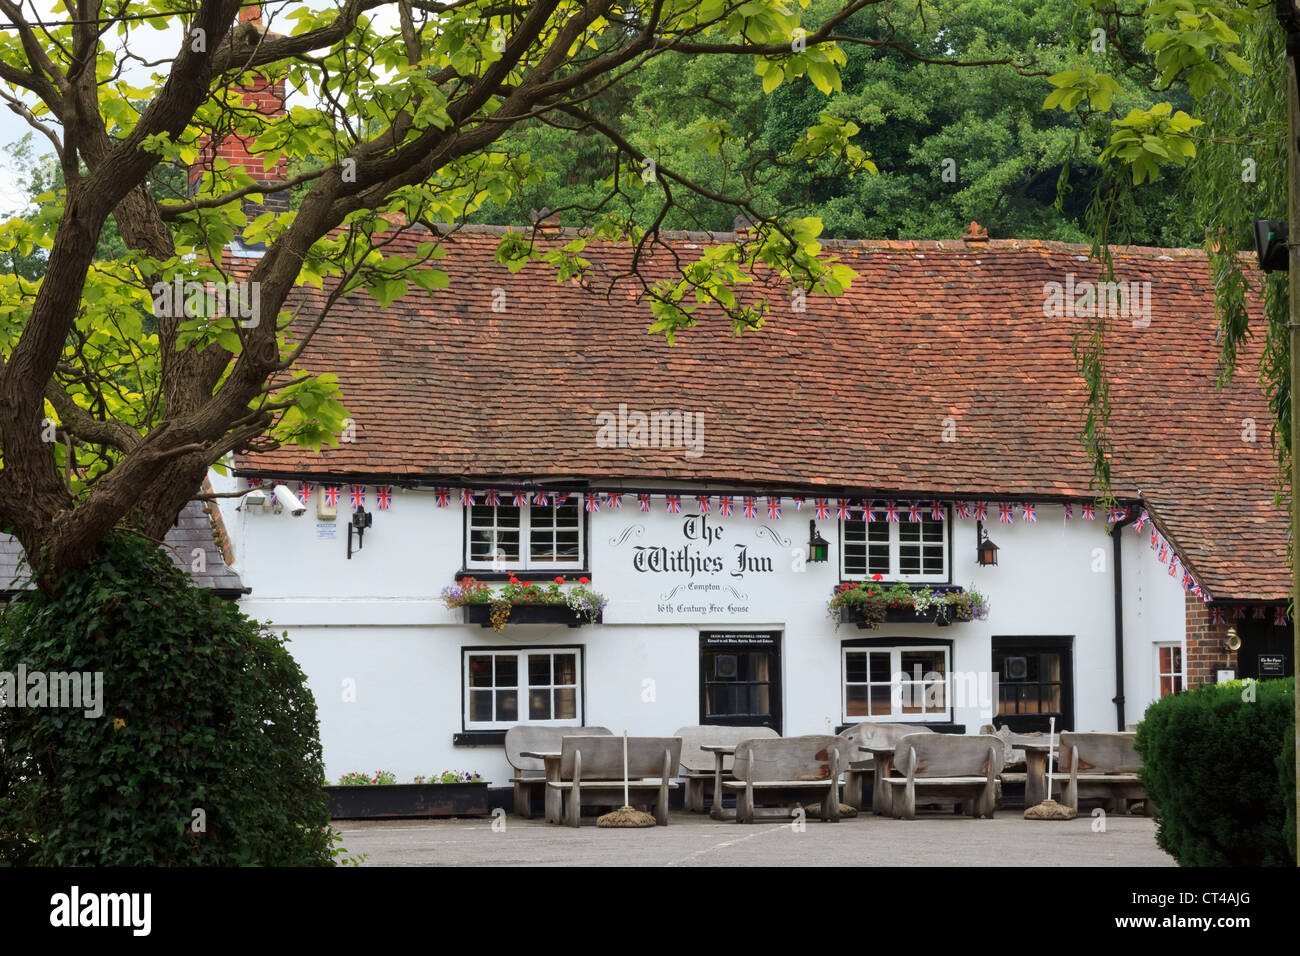 The Withies Inn, Compton common, Guildford, Surrey, U.K which dates back to the 16th century. Stock Photo